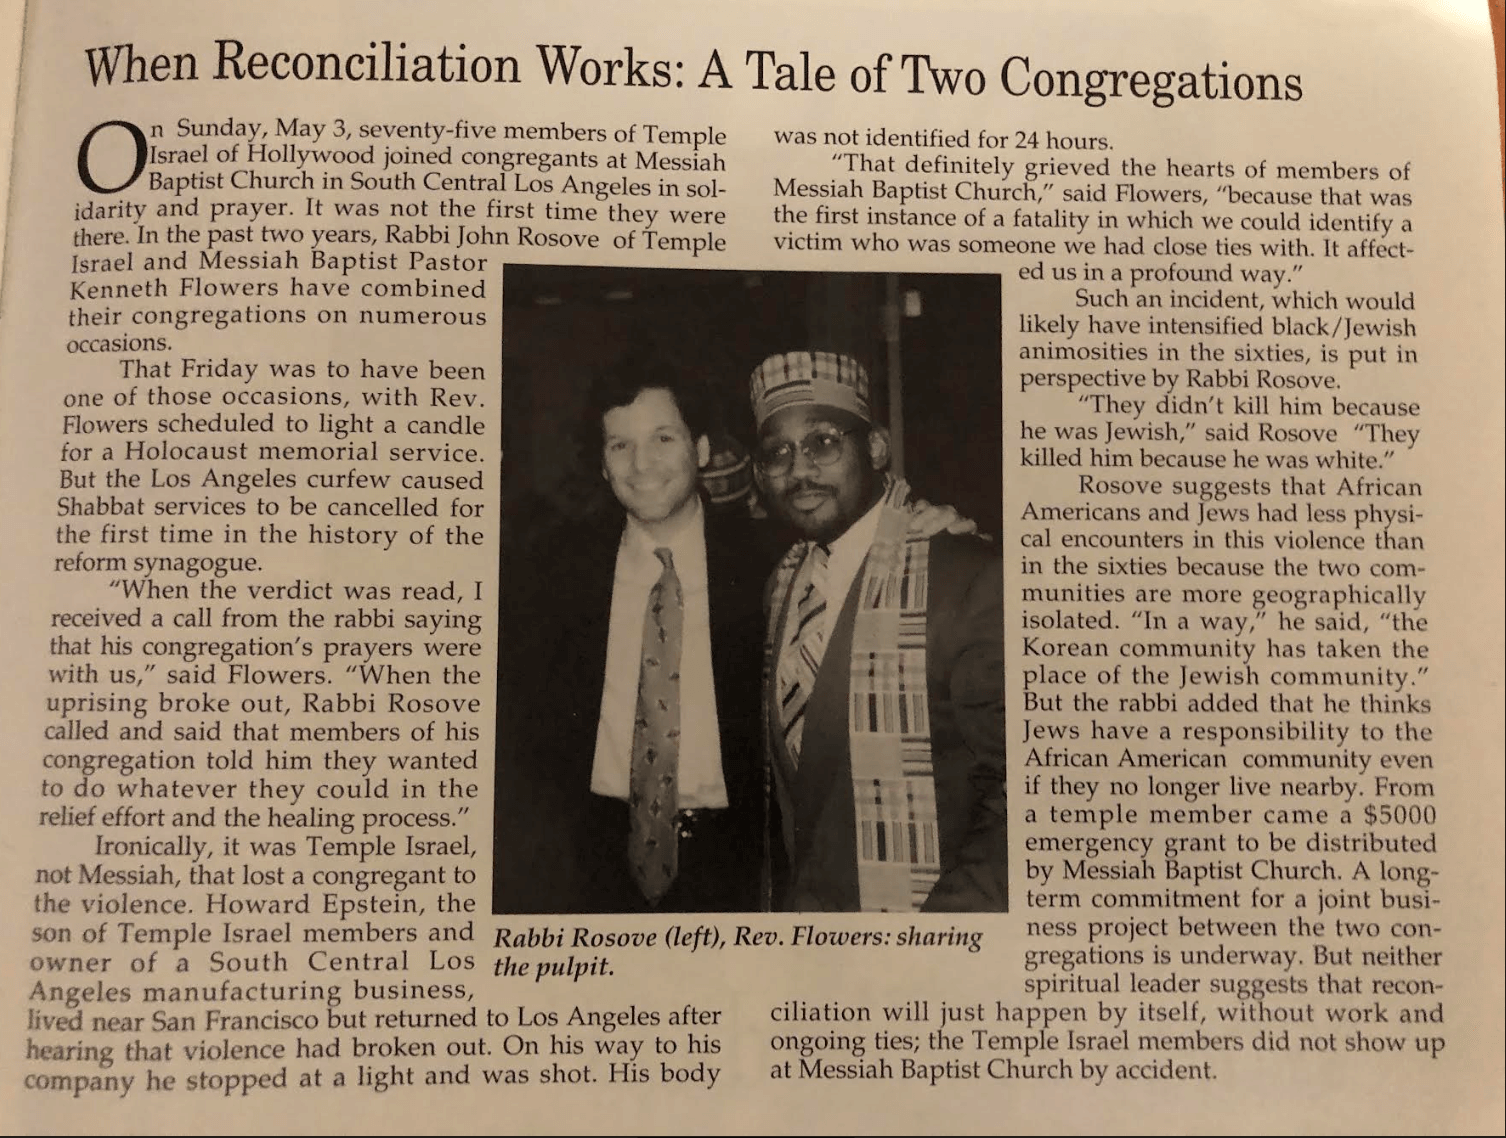 The 1992 article from Fellowship, the magazine for the Fellowship of Reconciliation, the pacifist and interfaith social justice organization for which Robin Washington served as editor at the time.